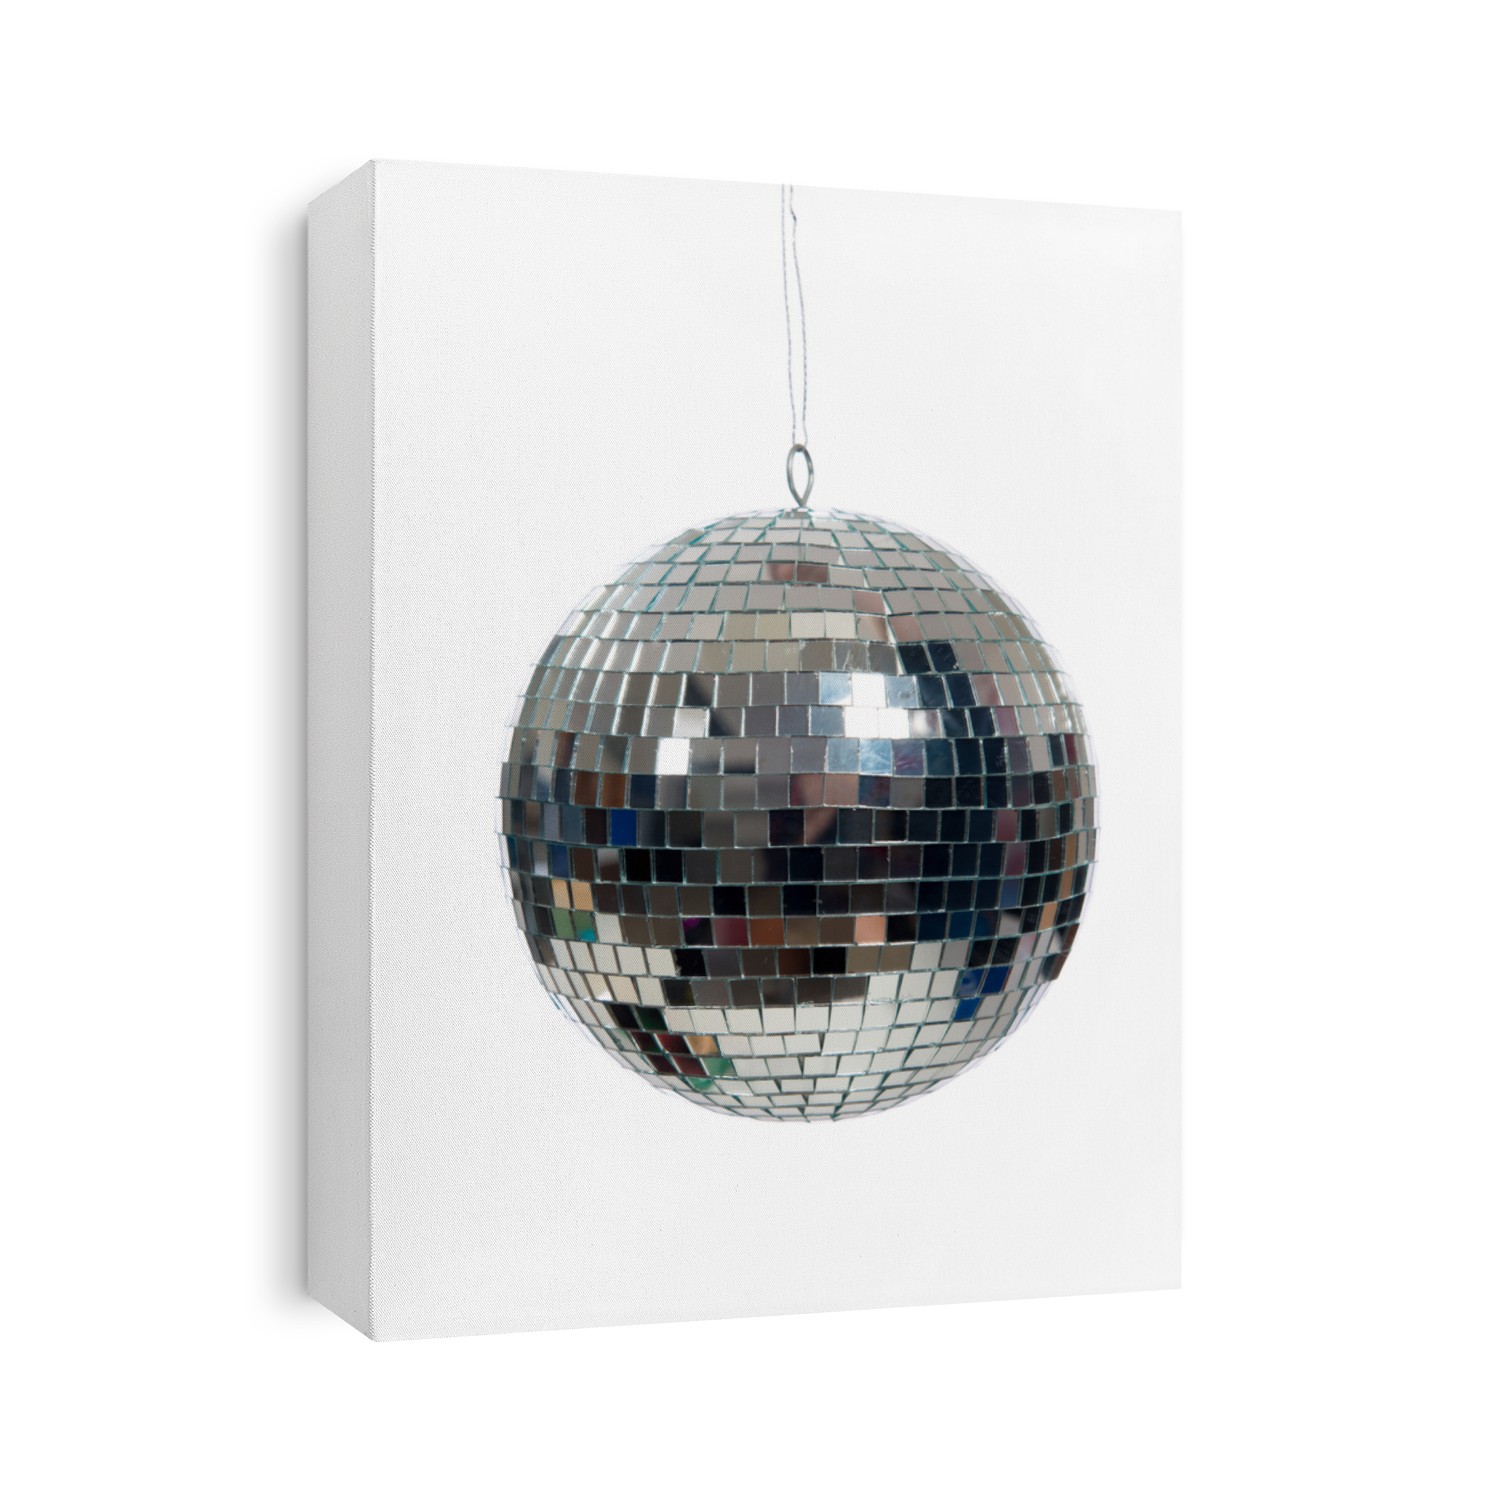 A silver mirrored disco ball on a white background